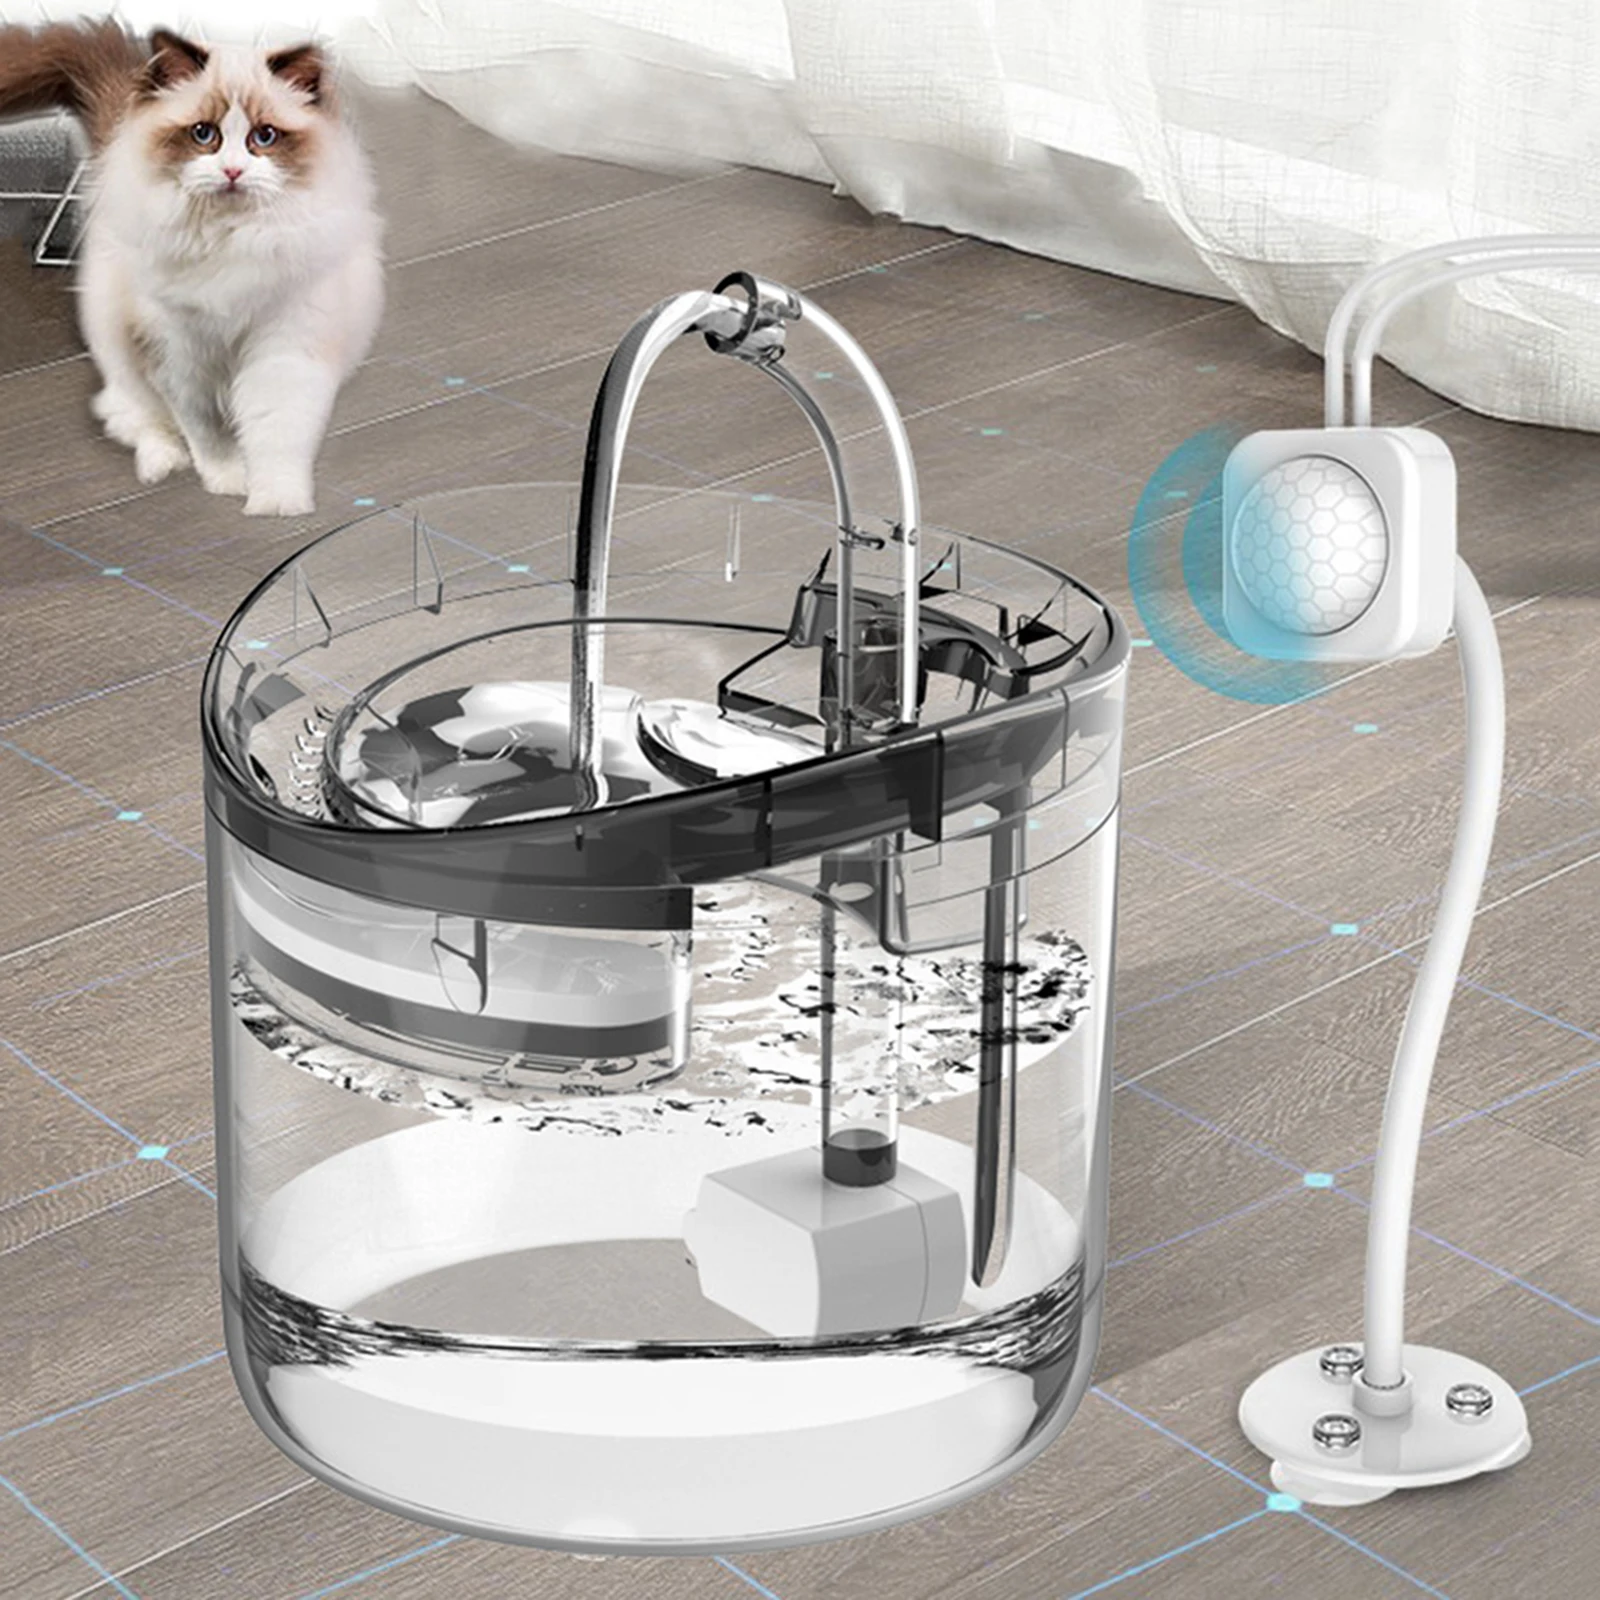 Automatic Cat Water Fountain With Faucet Cat Dog Water Fountain Water Dog Water Dispenser for Pet Healthy Drinking Fountain